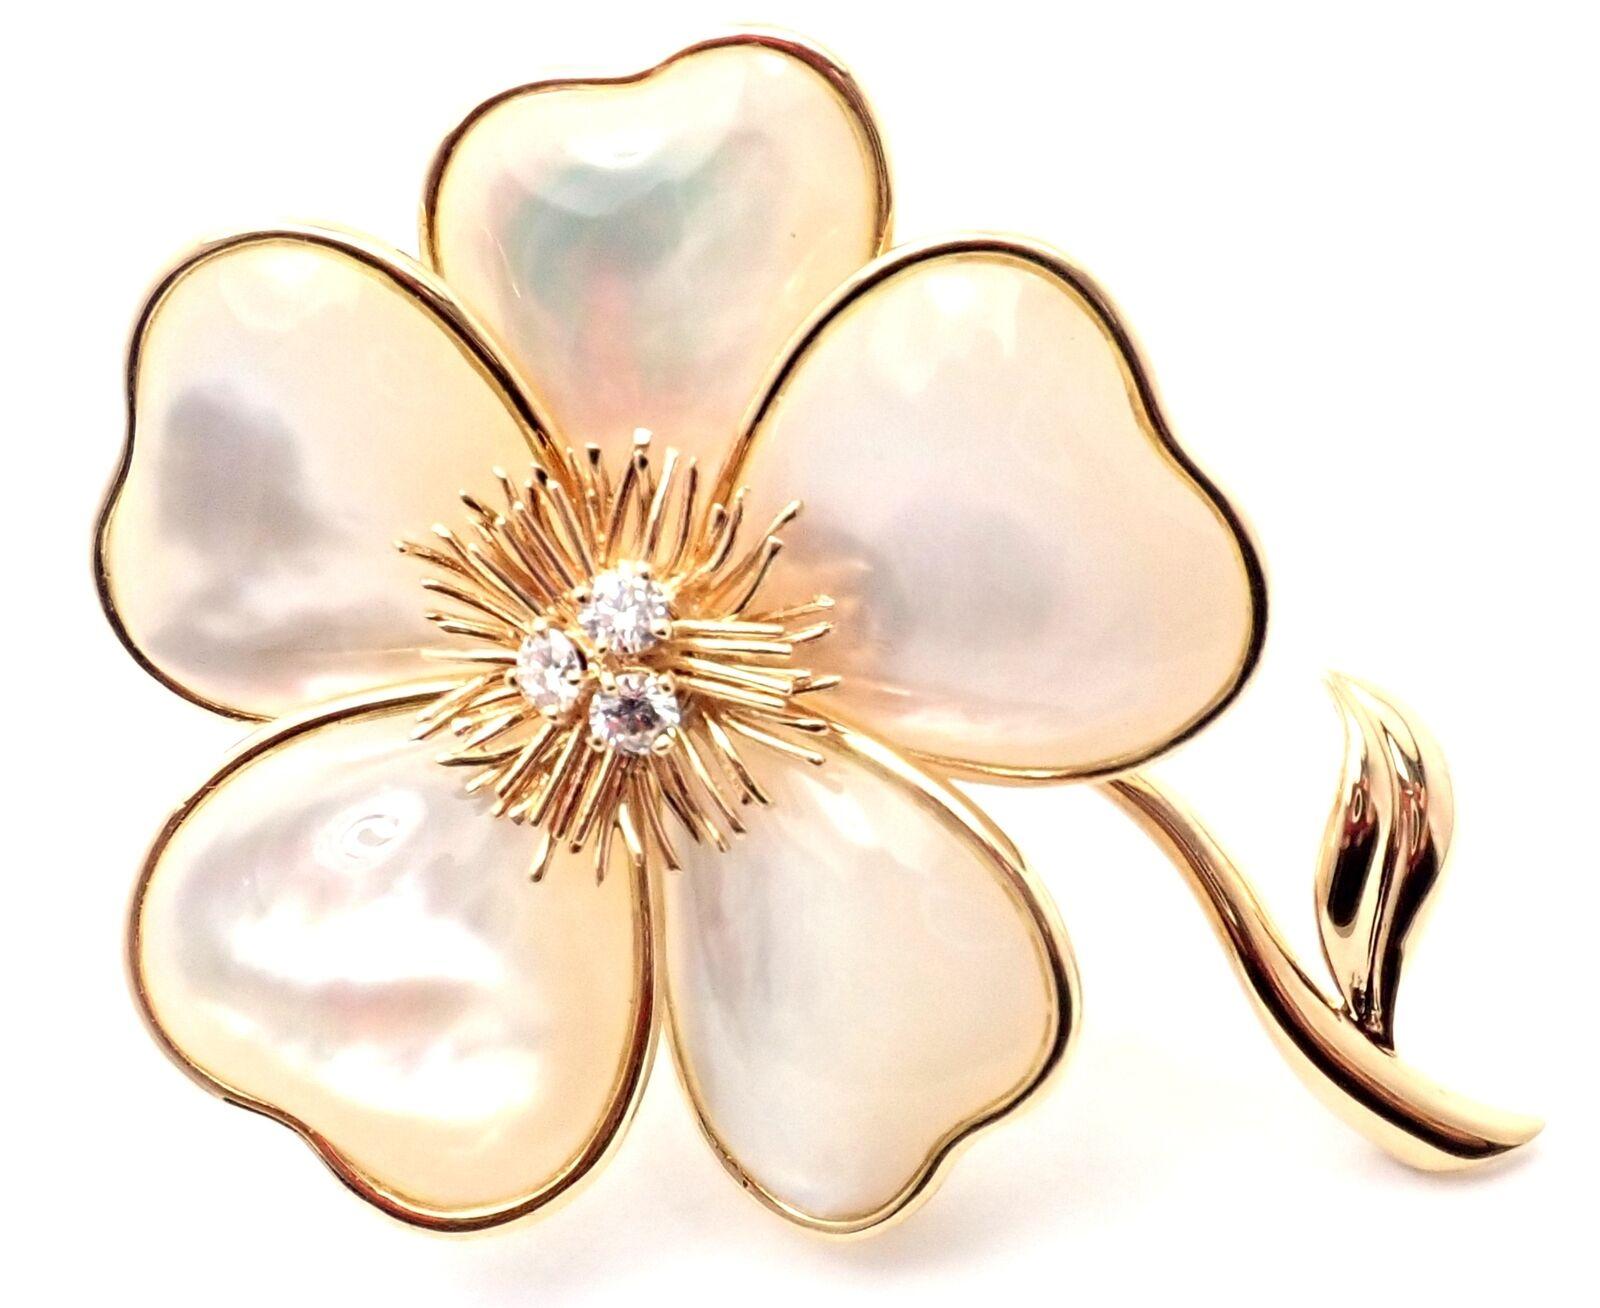 18k Yellow Gold Clématite Flower Diamond Mother Of Pearl Brooch by Van Cleef & Arpels.
This brooch comes with Van Cleef & Arpels box.
With 3 round brilliant cut diamonds VVS1 clarity, E color total weight approx. .60ct
5 mother of pearl